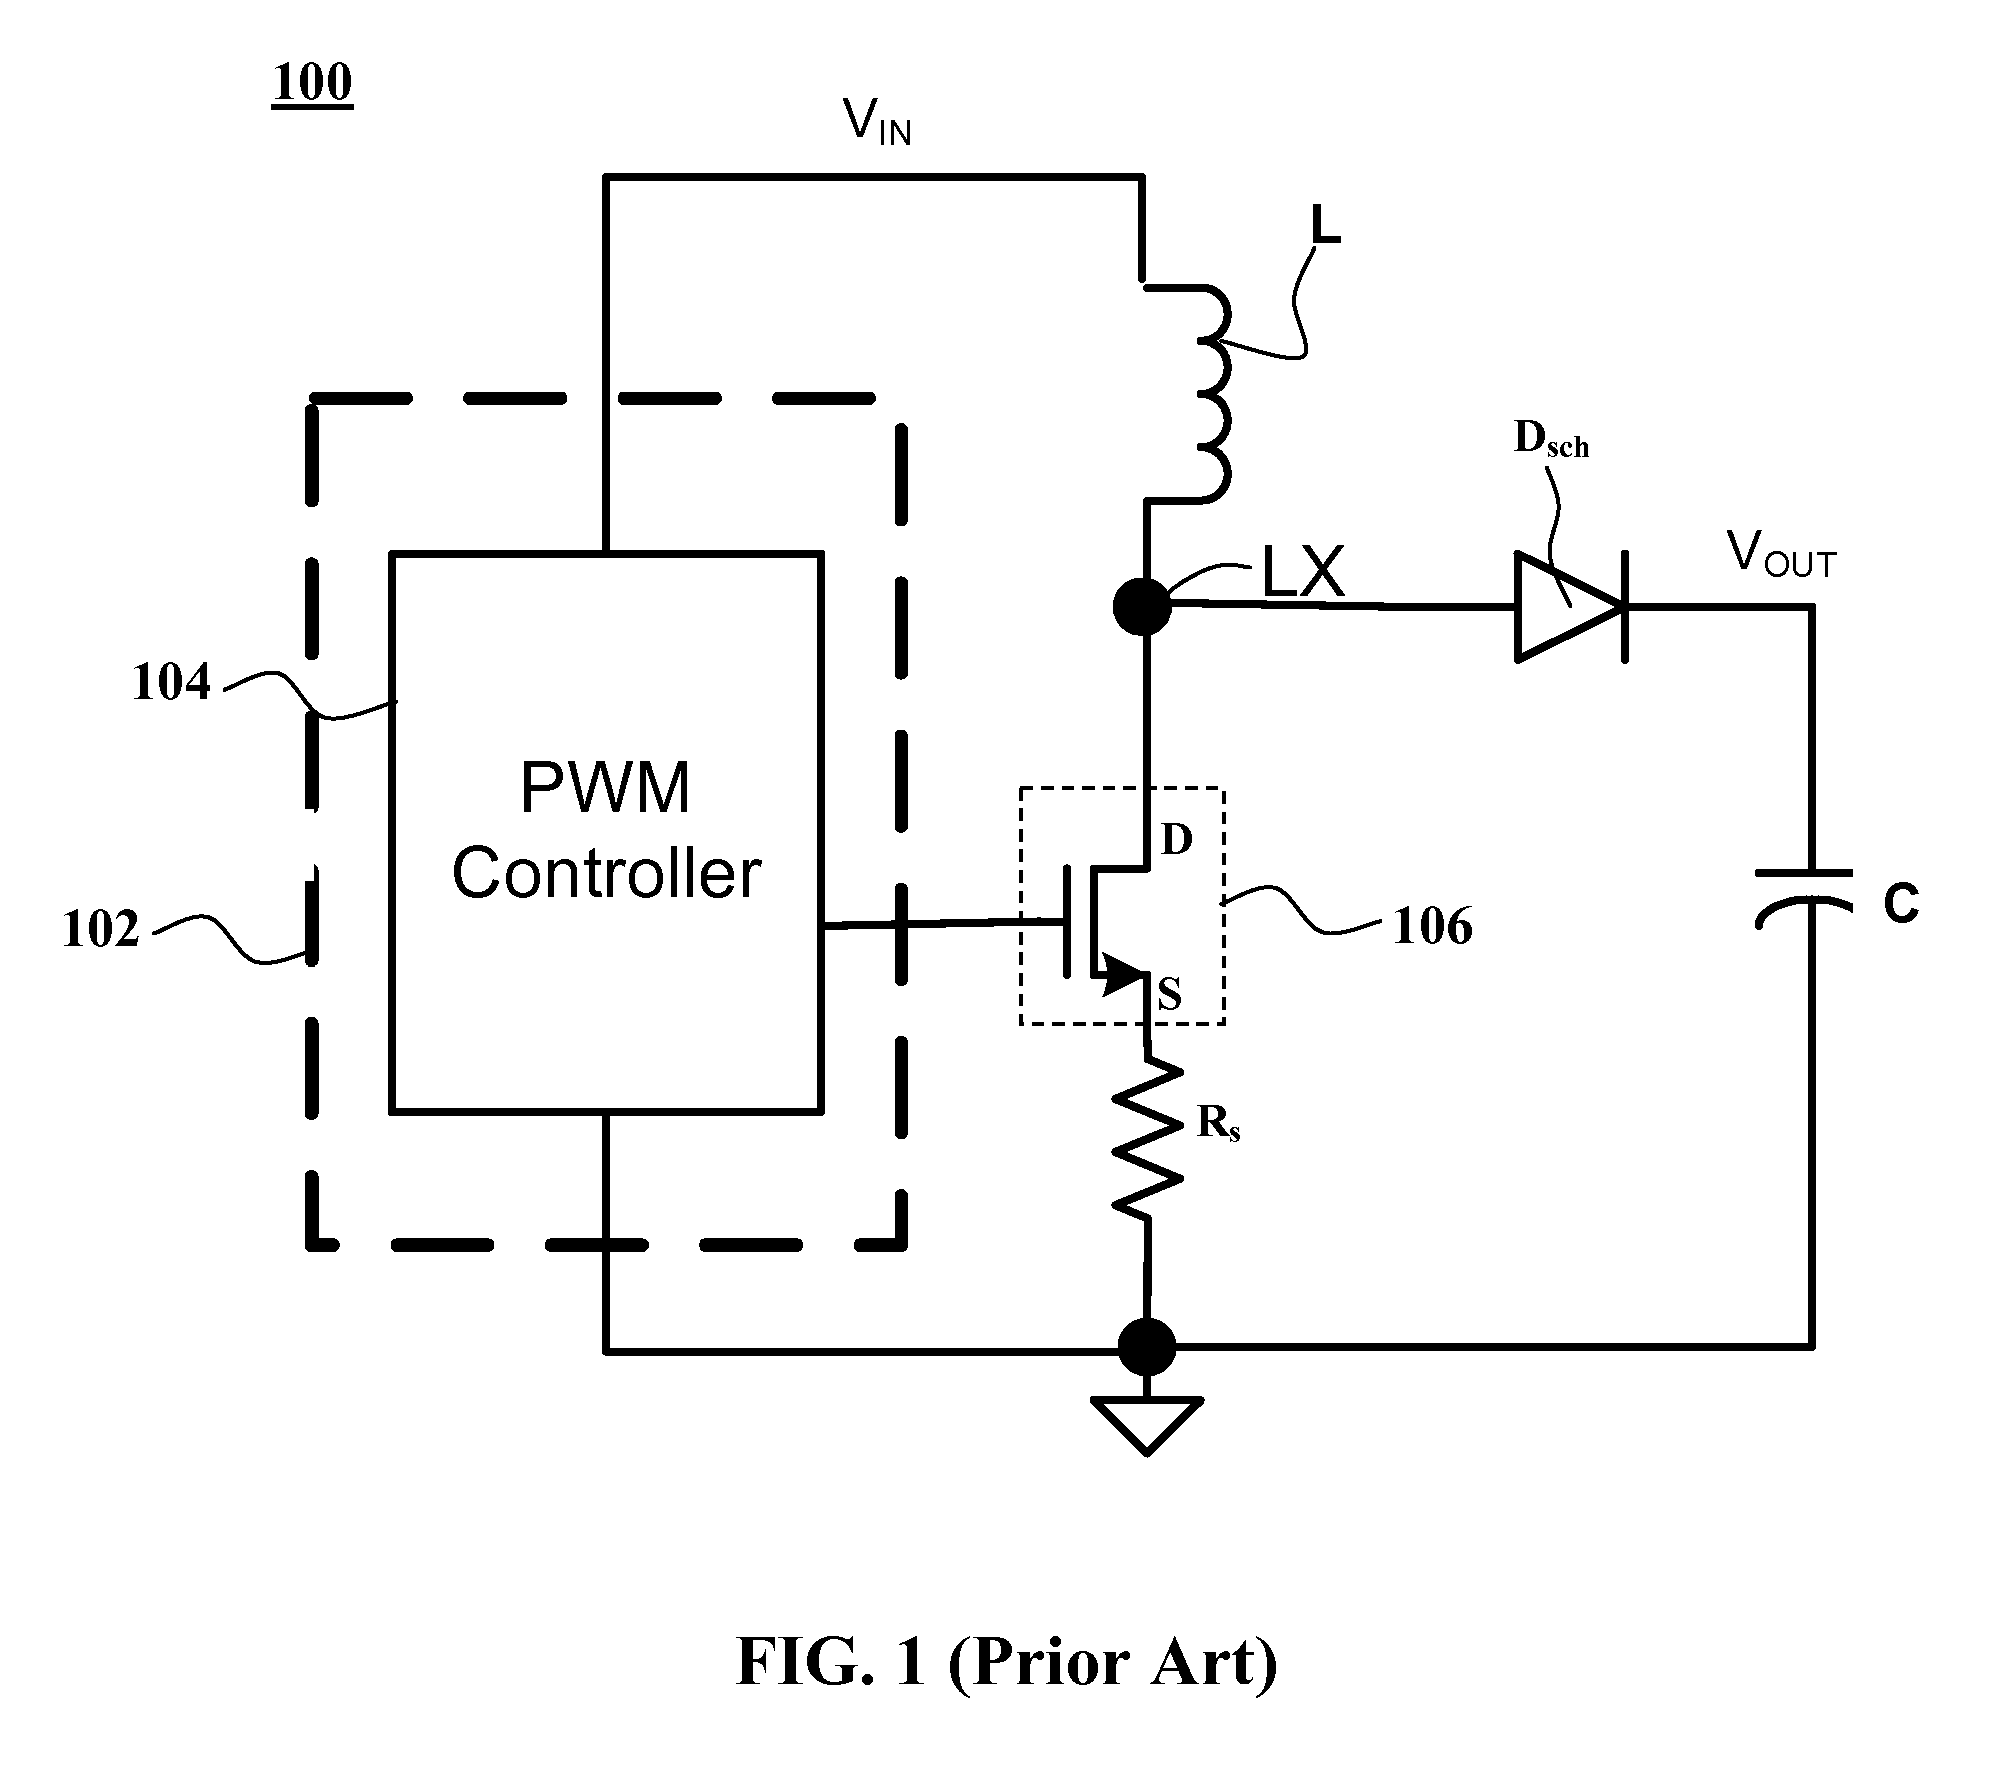 Boost converter with integrated high power discrete fet and low voltage controller